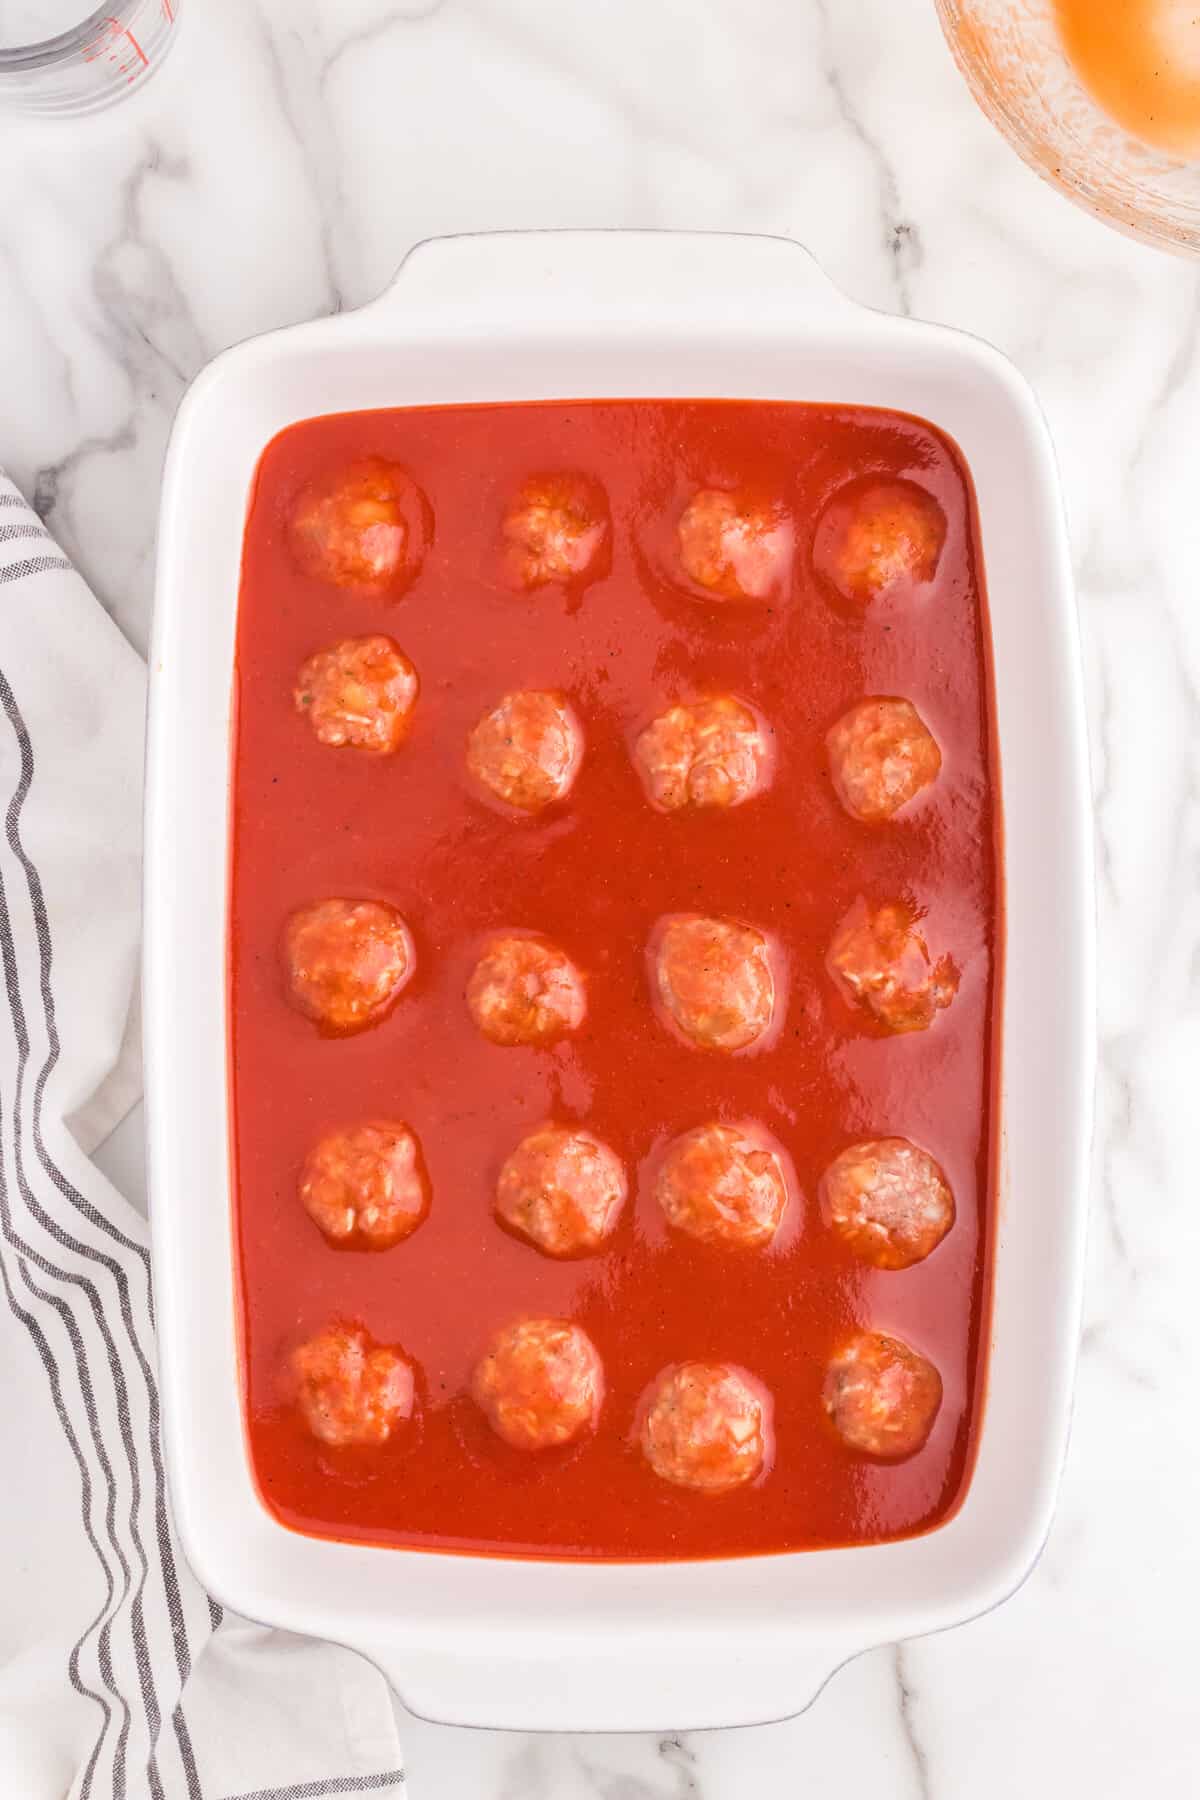 Pouring sauce over formed meatballs in 9x13 baking dish for Porcupine Meatballs recipe